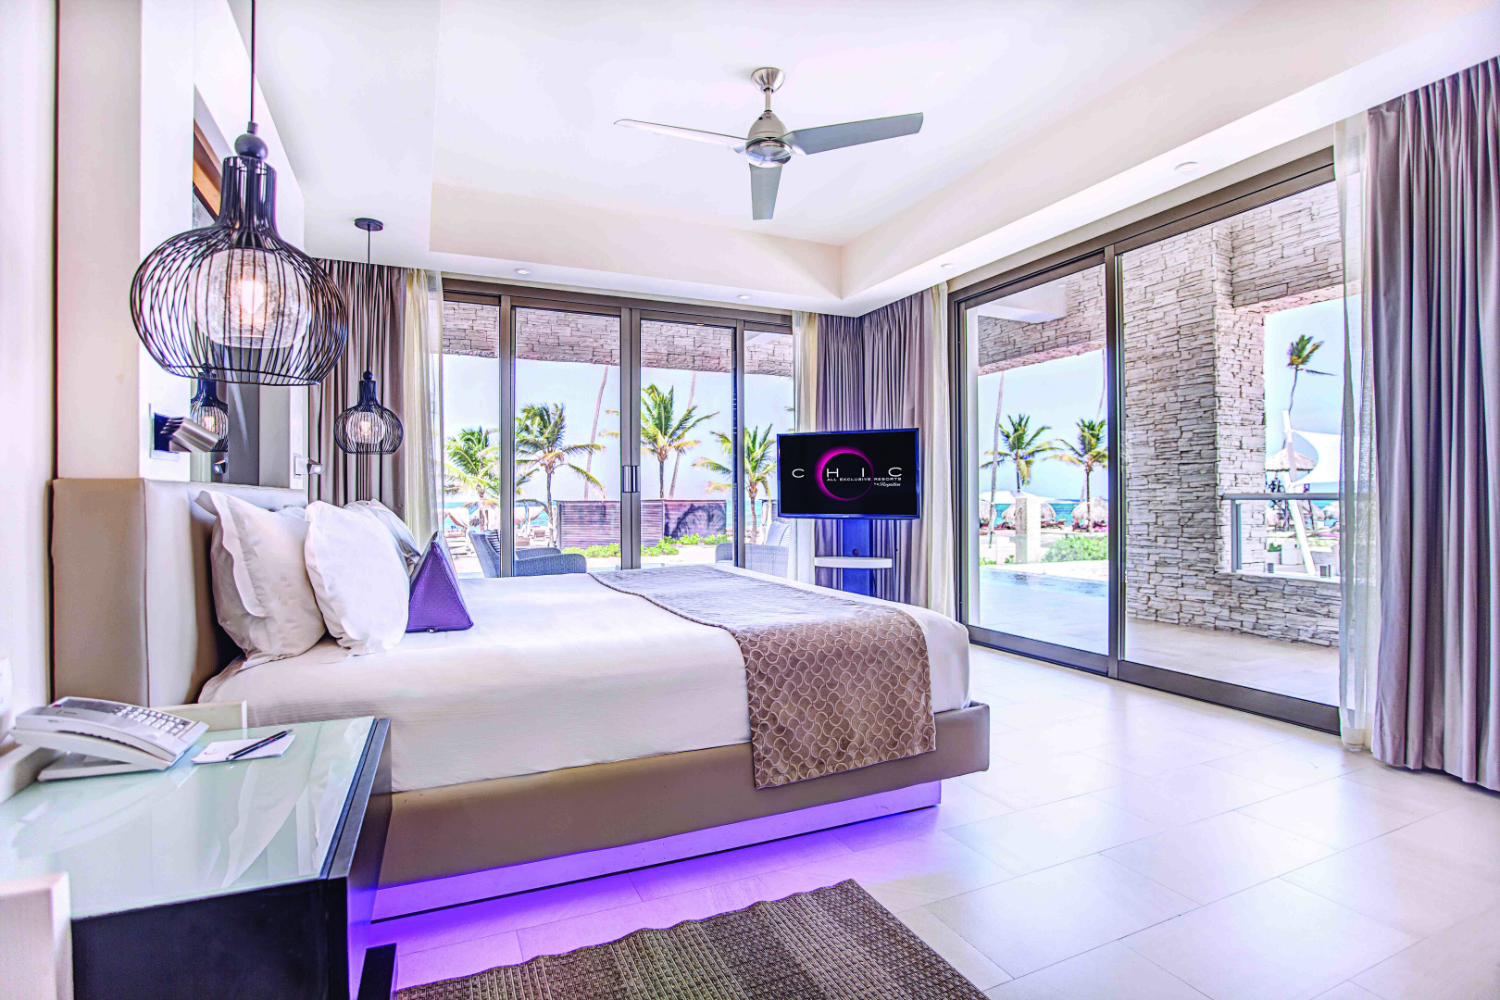 CHIC Punta Cana – DC Luxury Presidential Suite Swim Out Ocean View-w1500-h1000